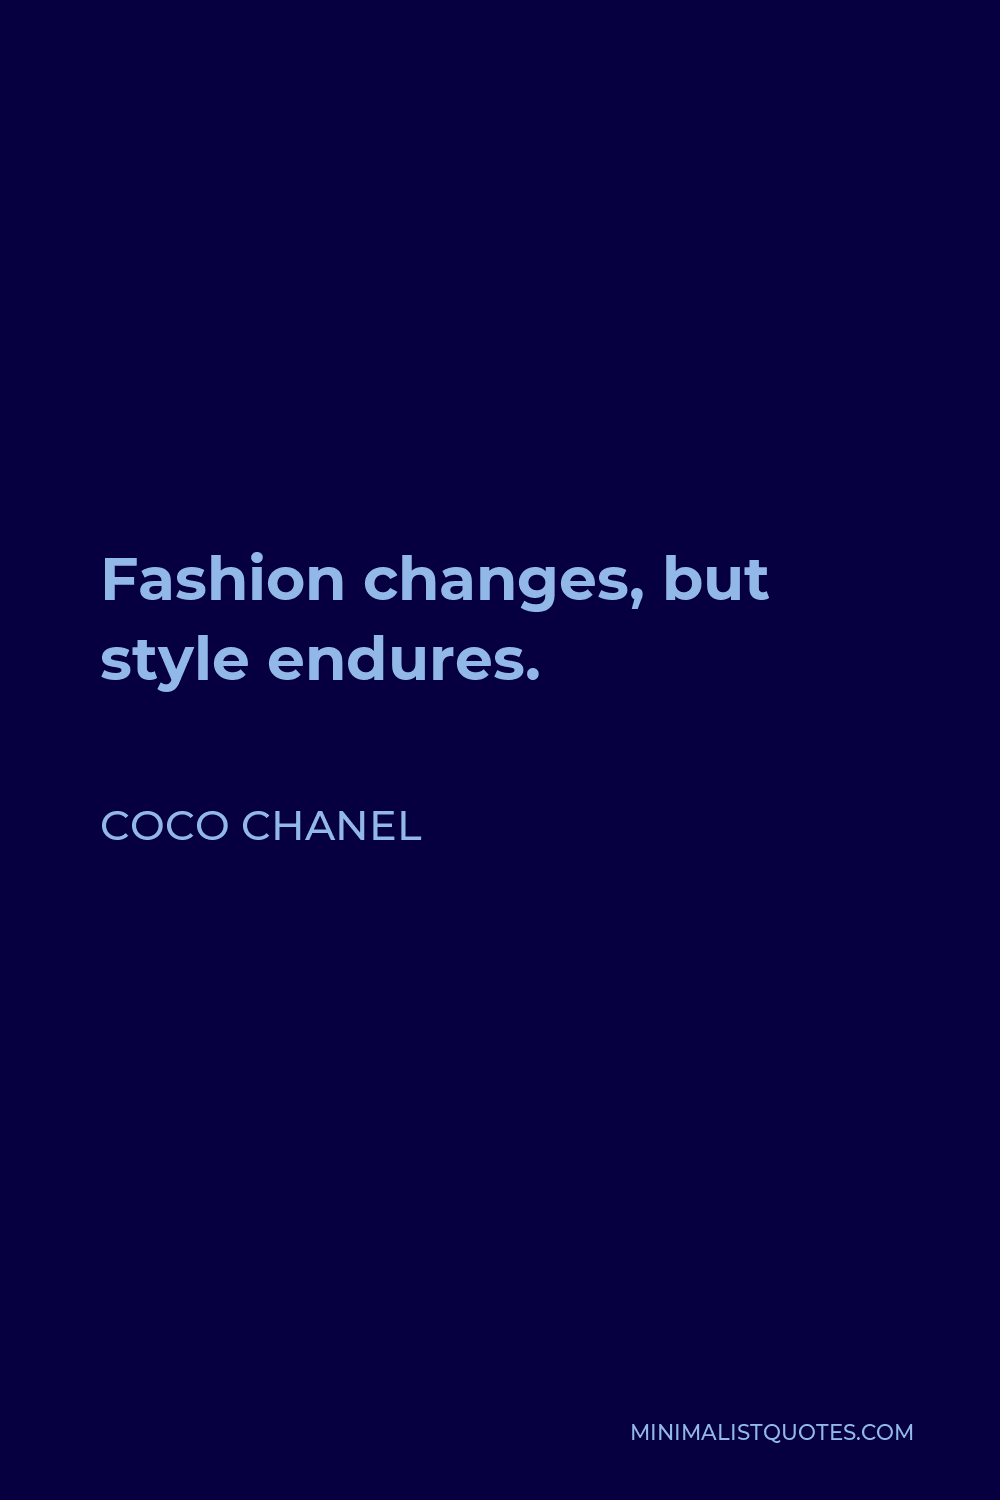 Coco Chanel Quote - Fashion changes, but style endures.